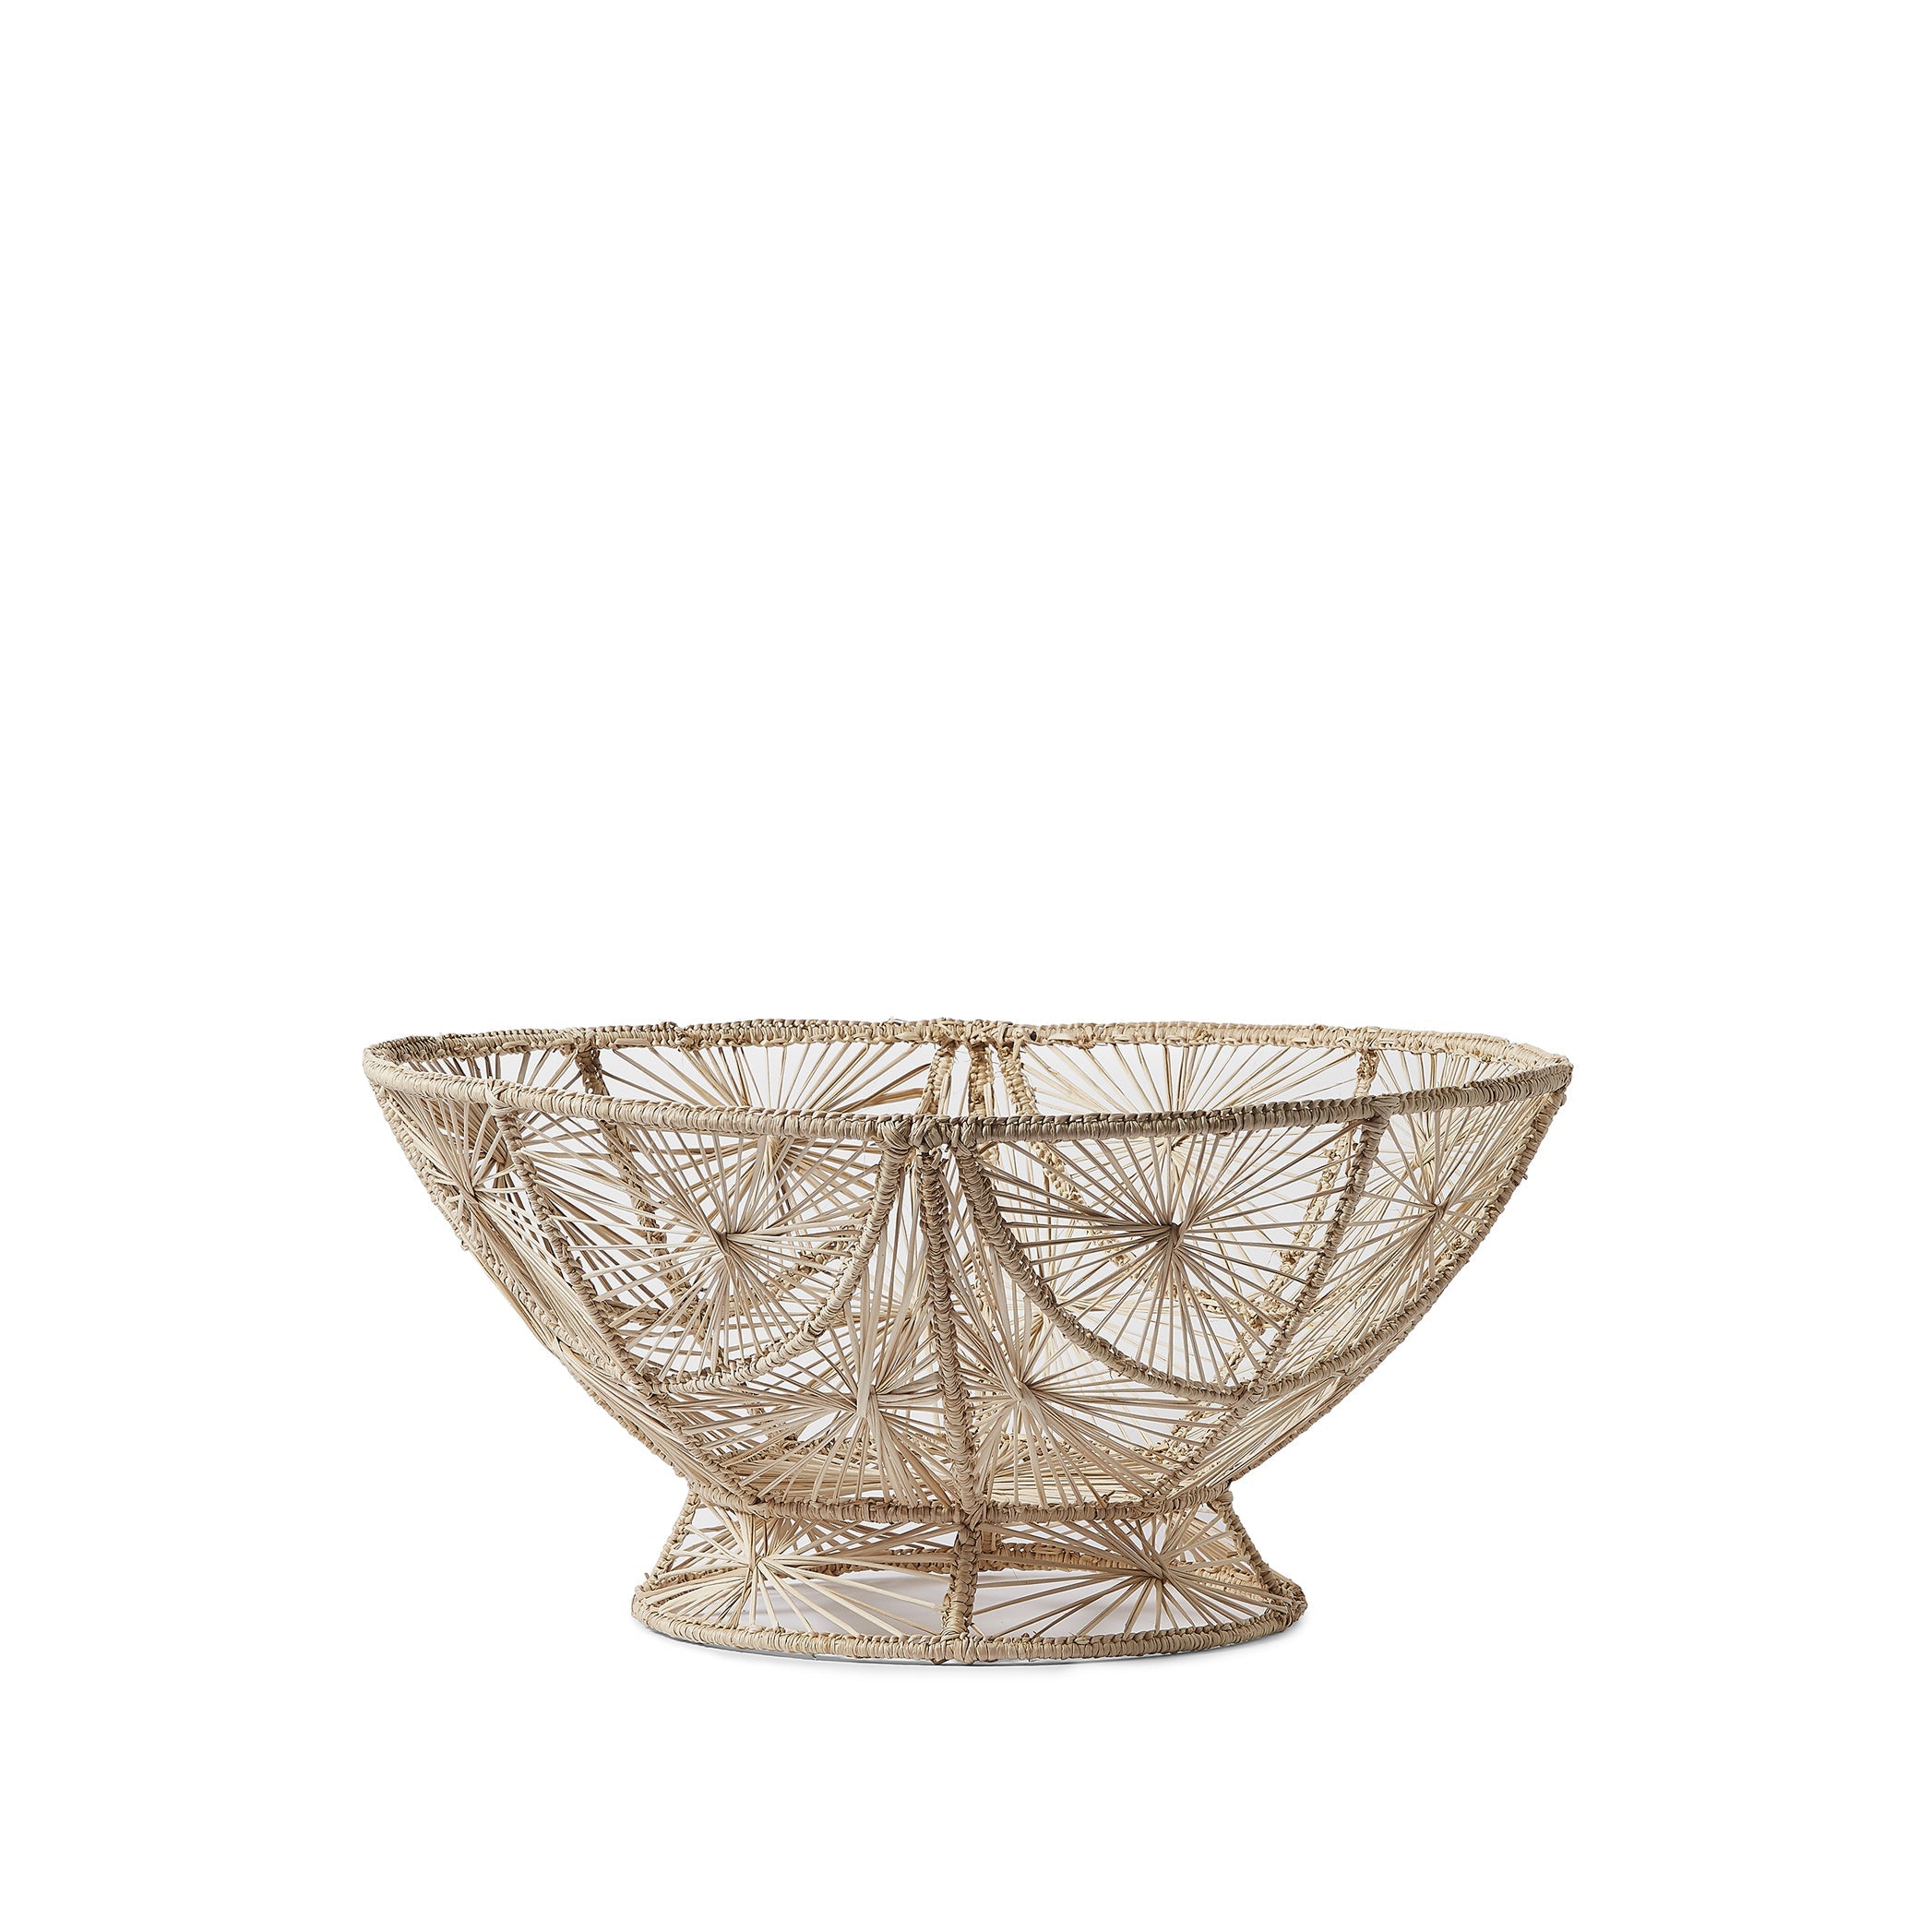 Handwoven Spider Salad Bowl in Natural